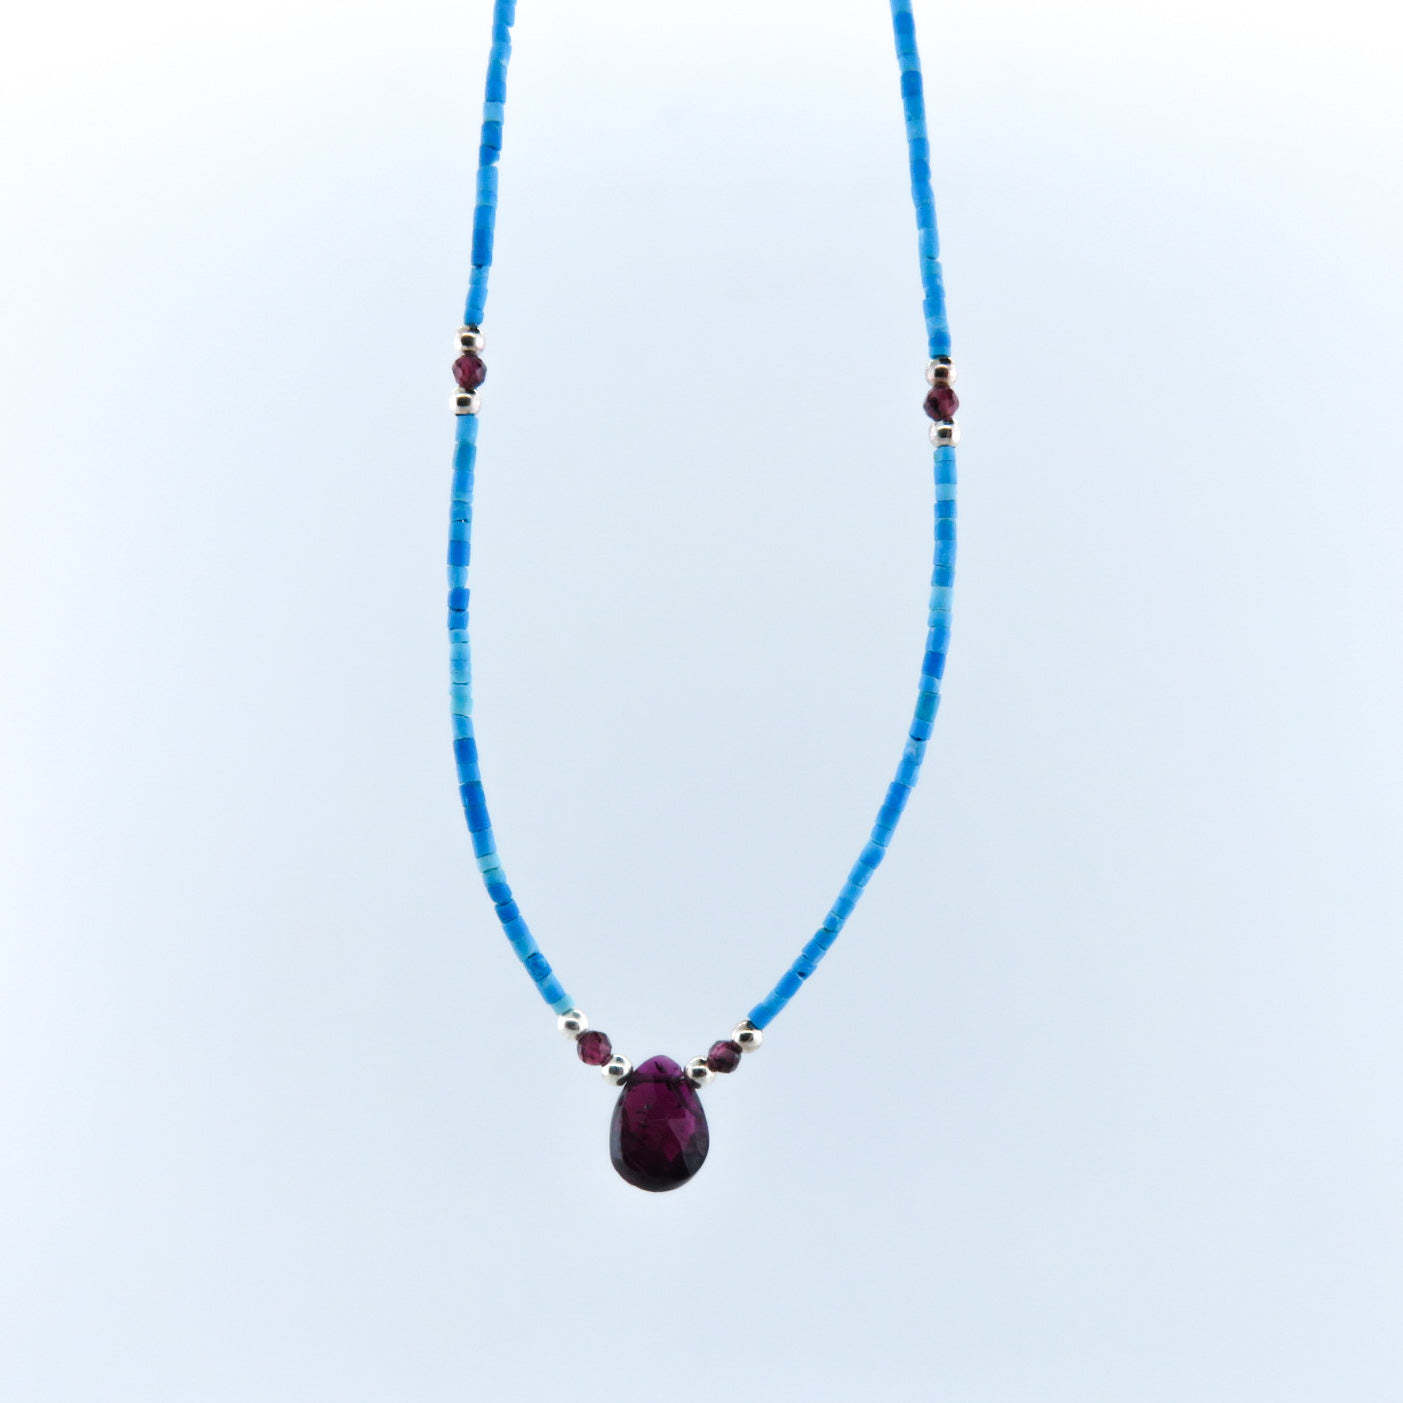 Turquoise Necklace with Garnet and Silver Beads